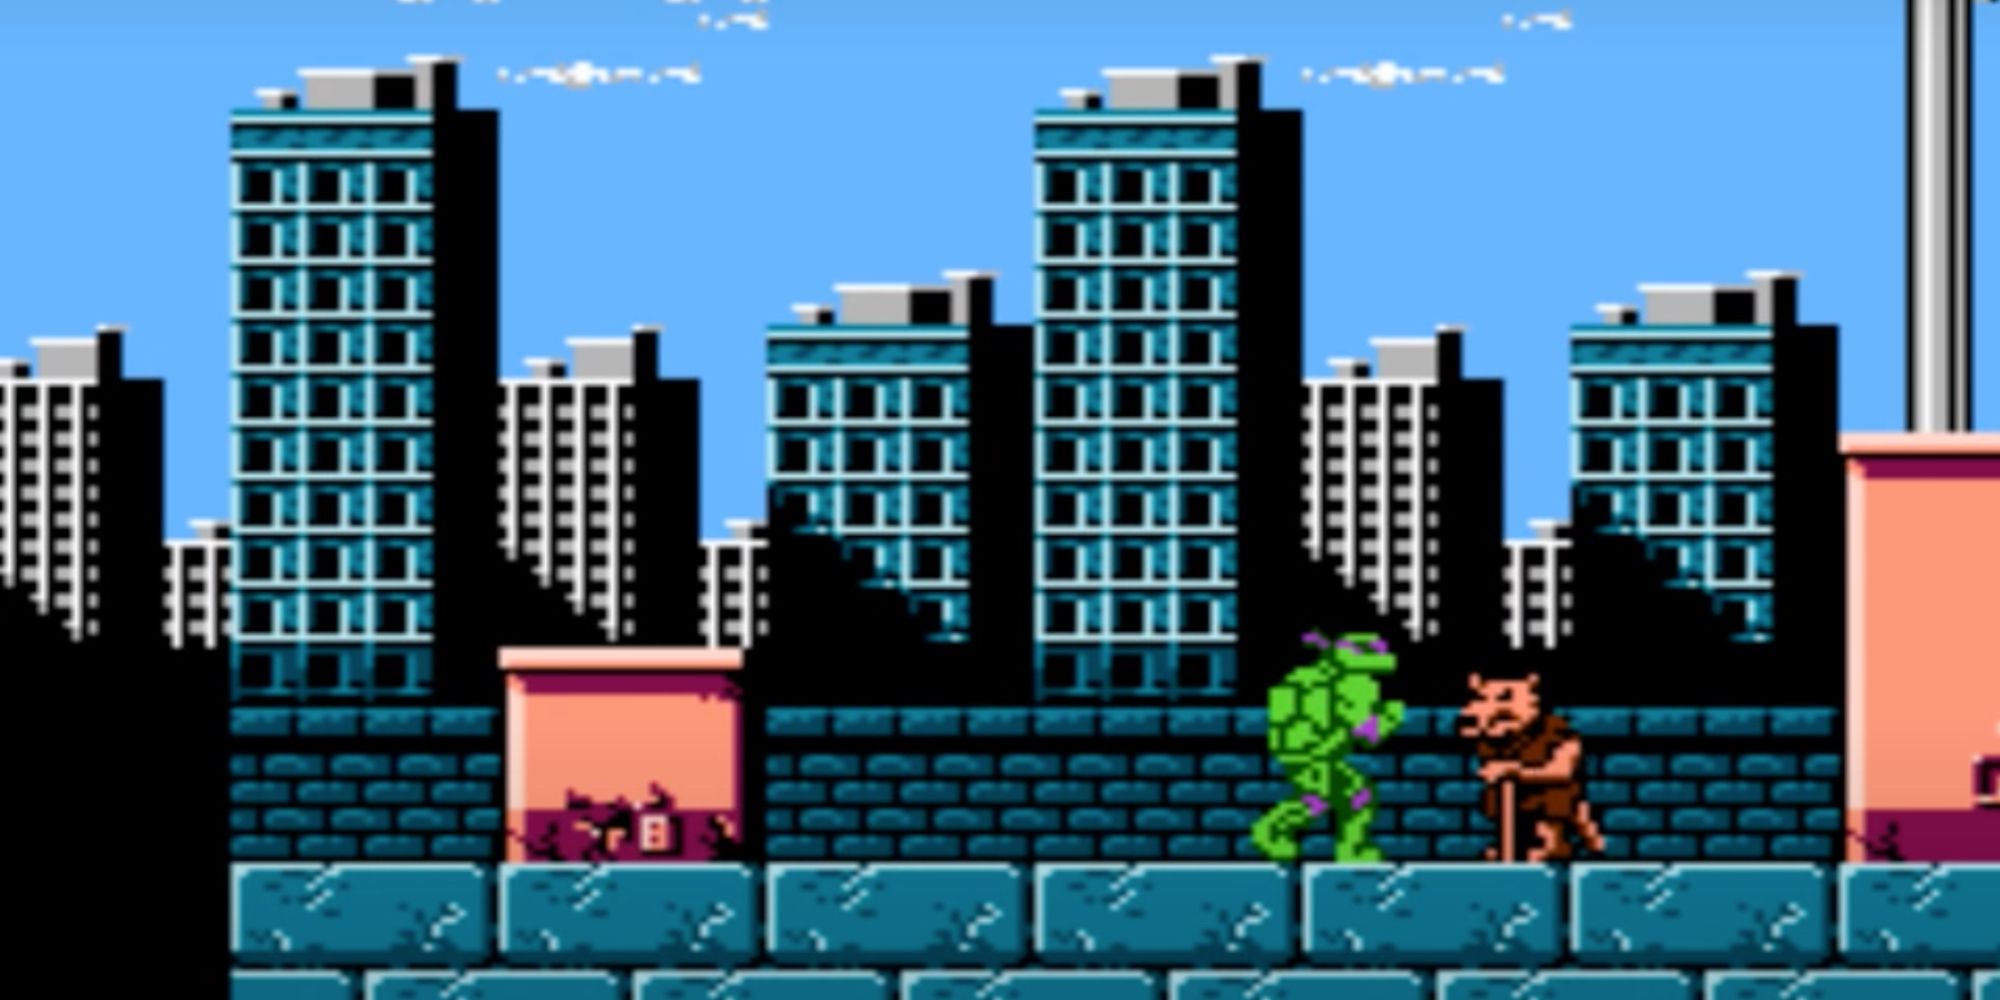 The Cowabunga Collection will bring back the first ever Teenage Mutant Ninja Turtles game, made for the NES